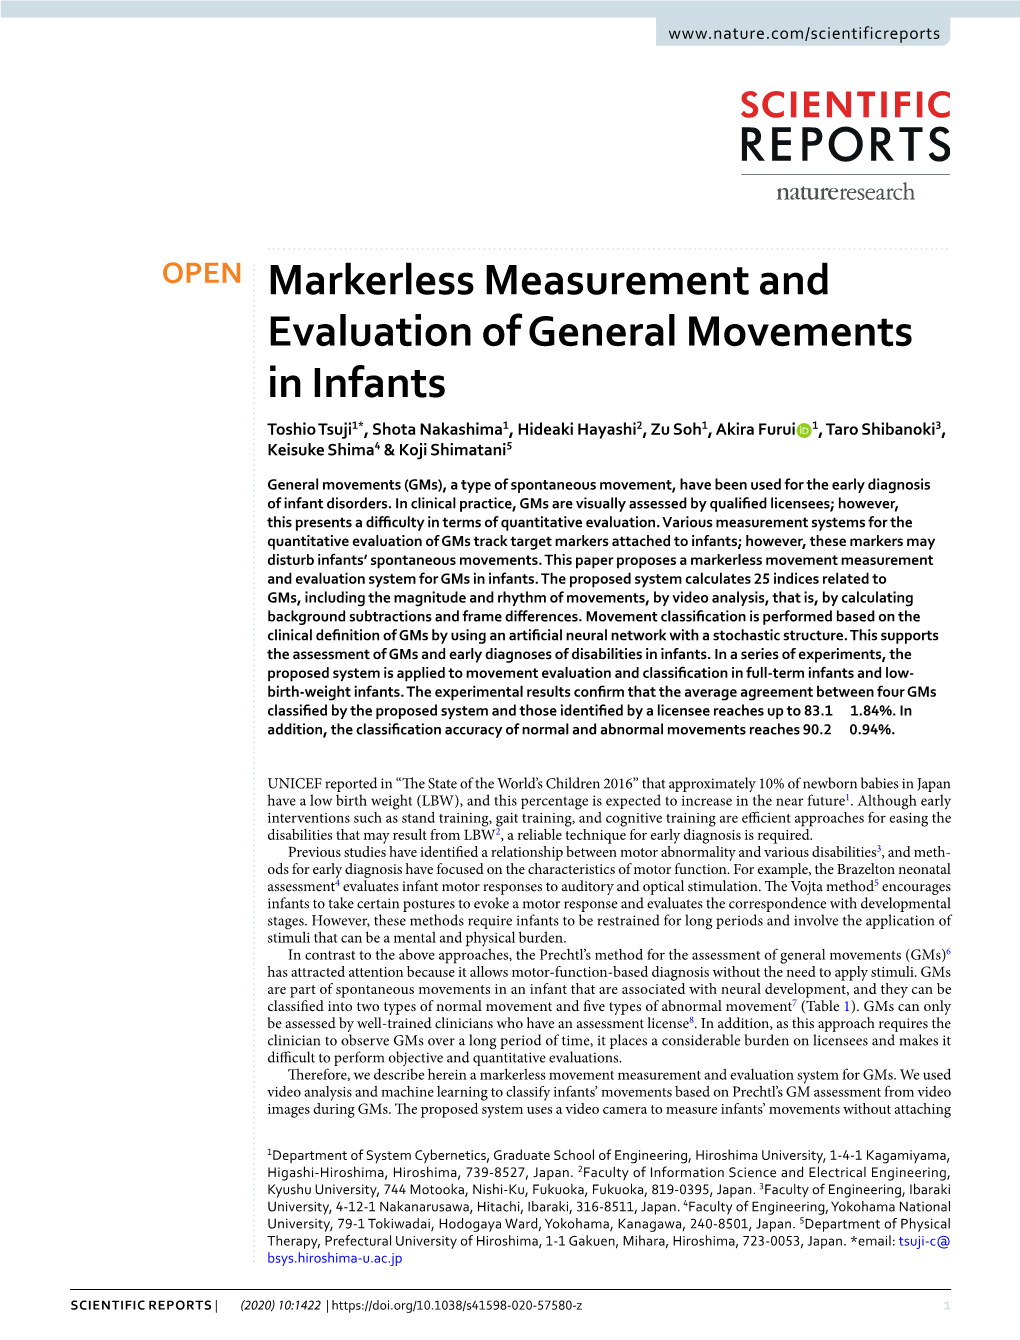 Markerless Measurement and Evaluation of General Movements in Infants